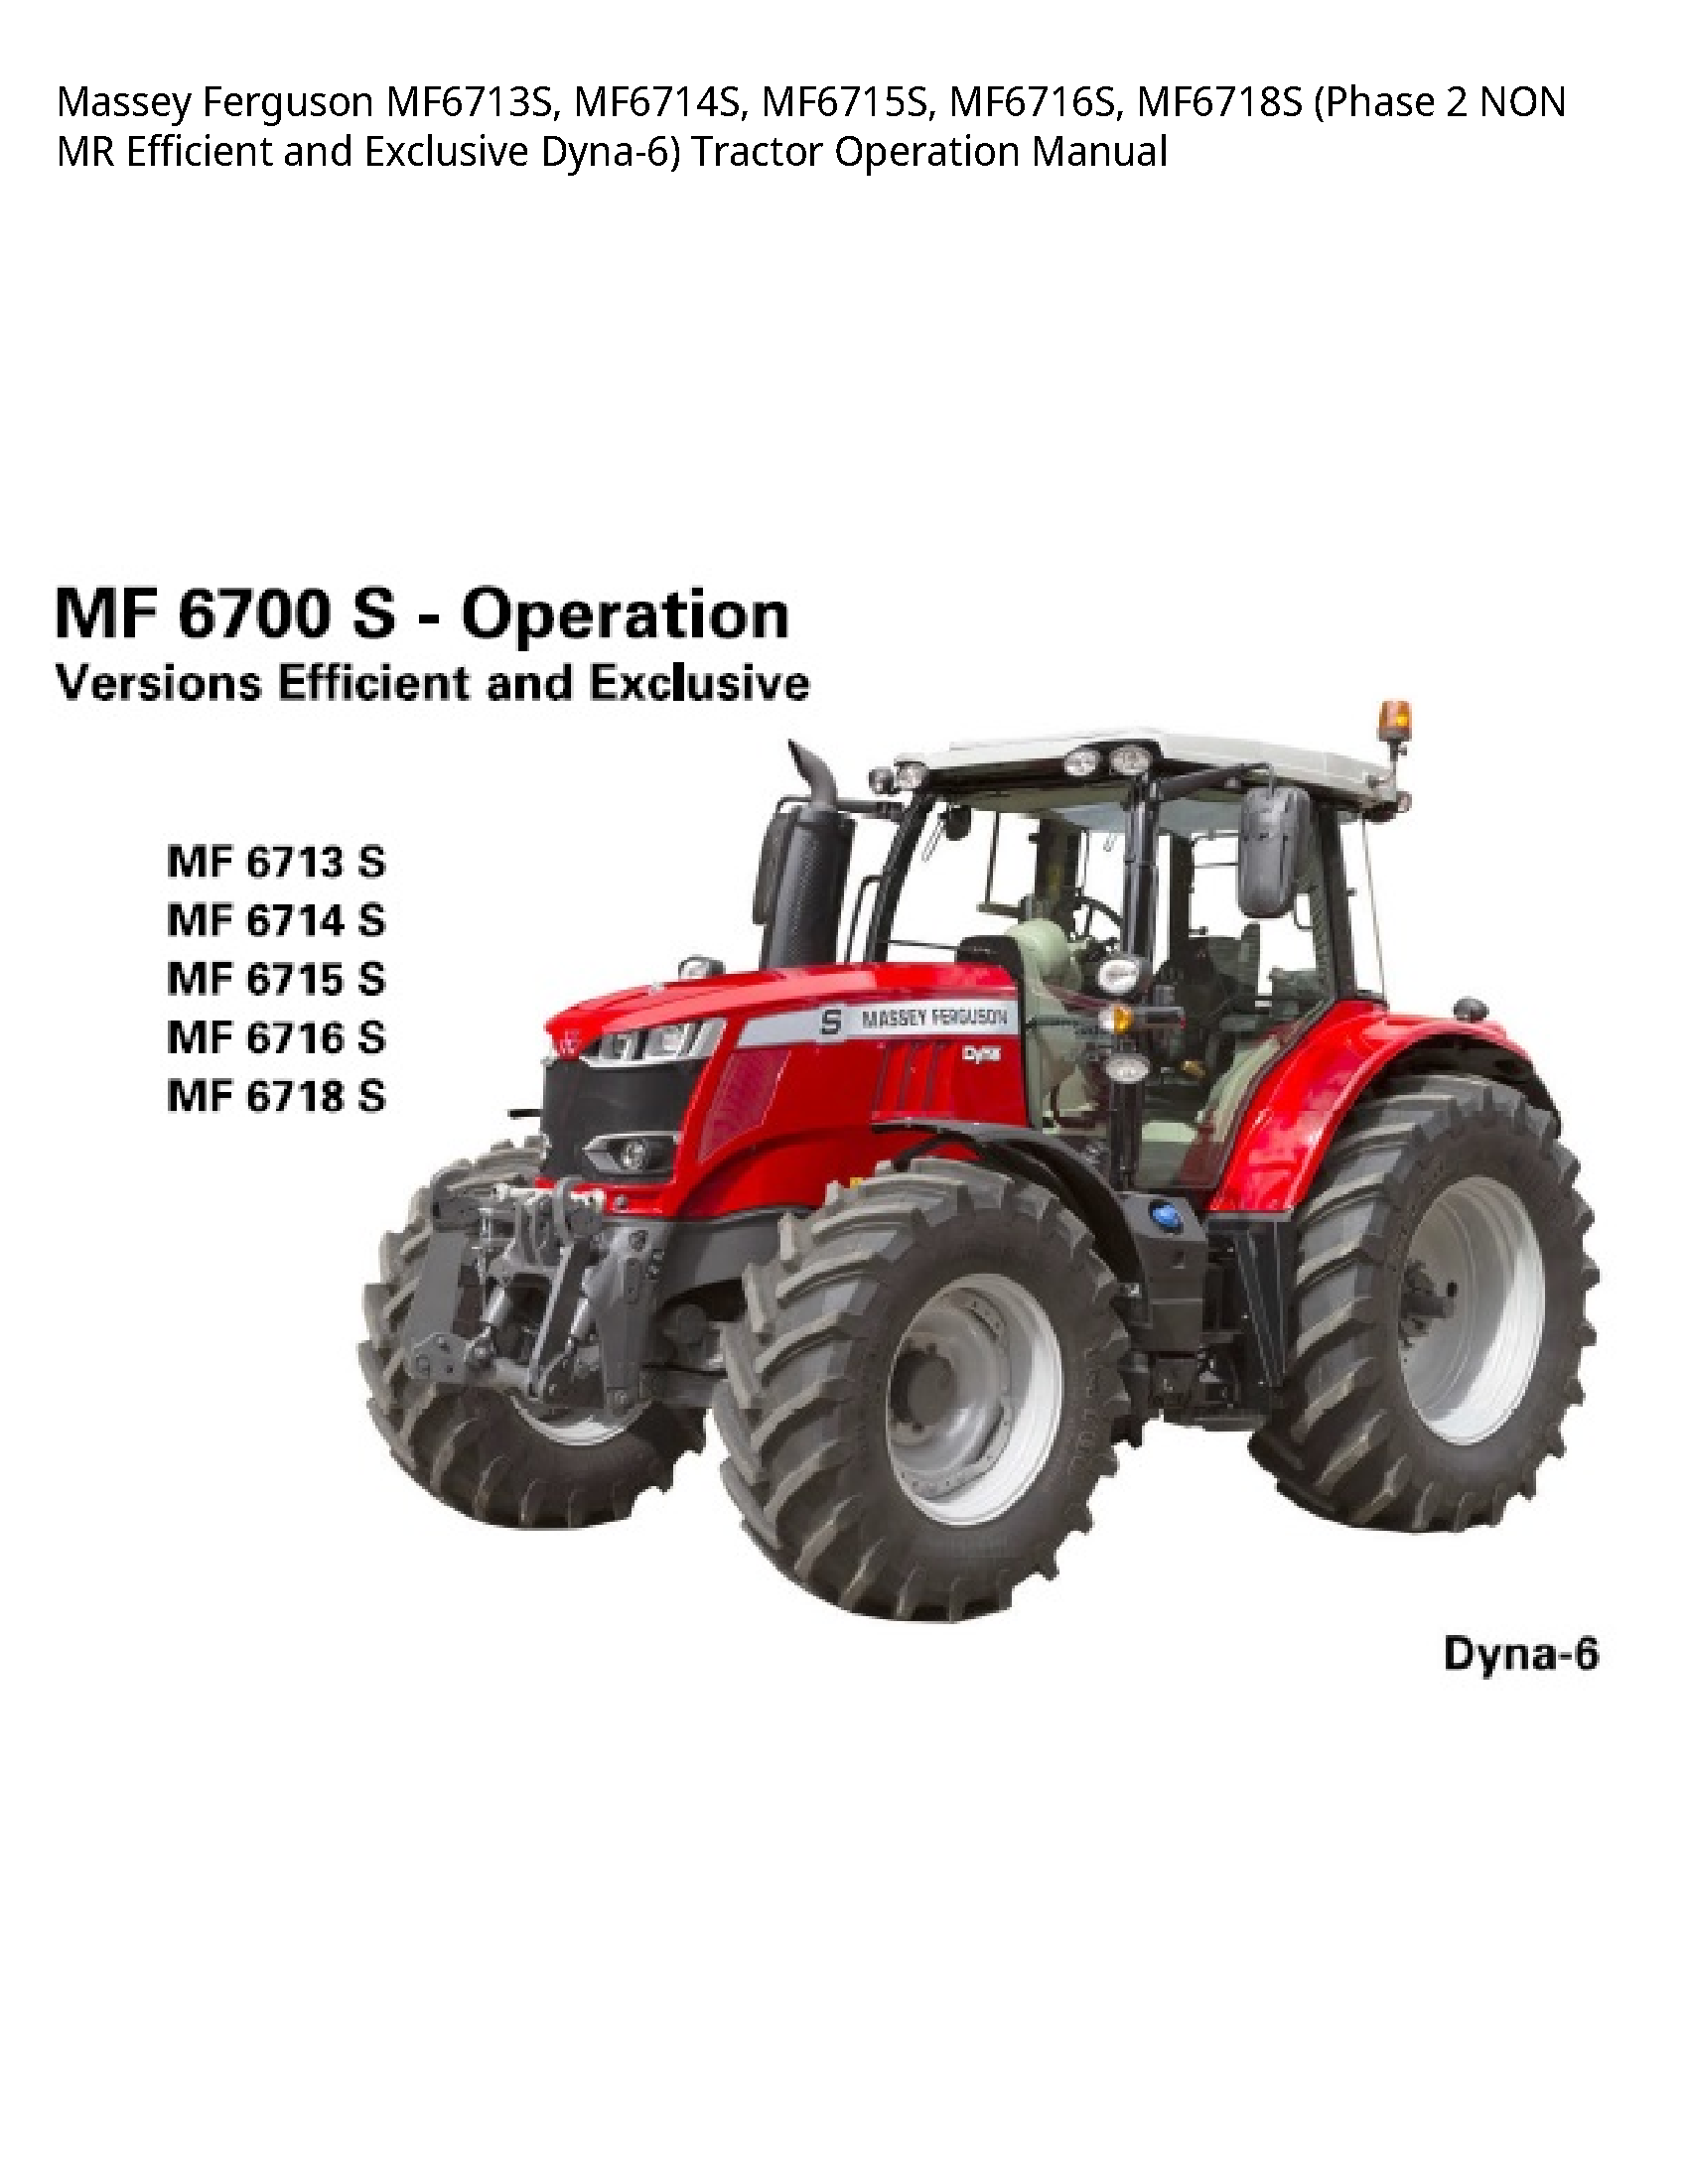 Massey Ferguson MF6713S (Phase NON MR Efficient  Exclusive Tractor Operation manual